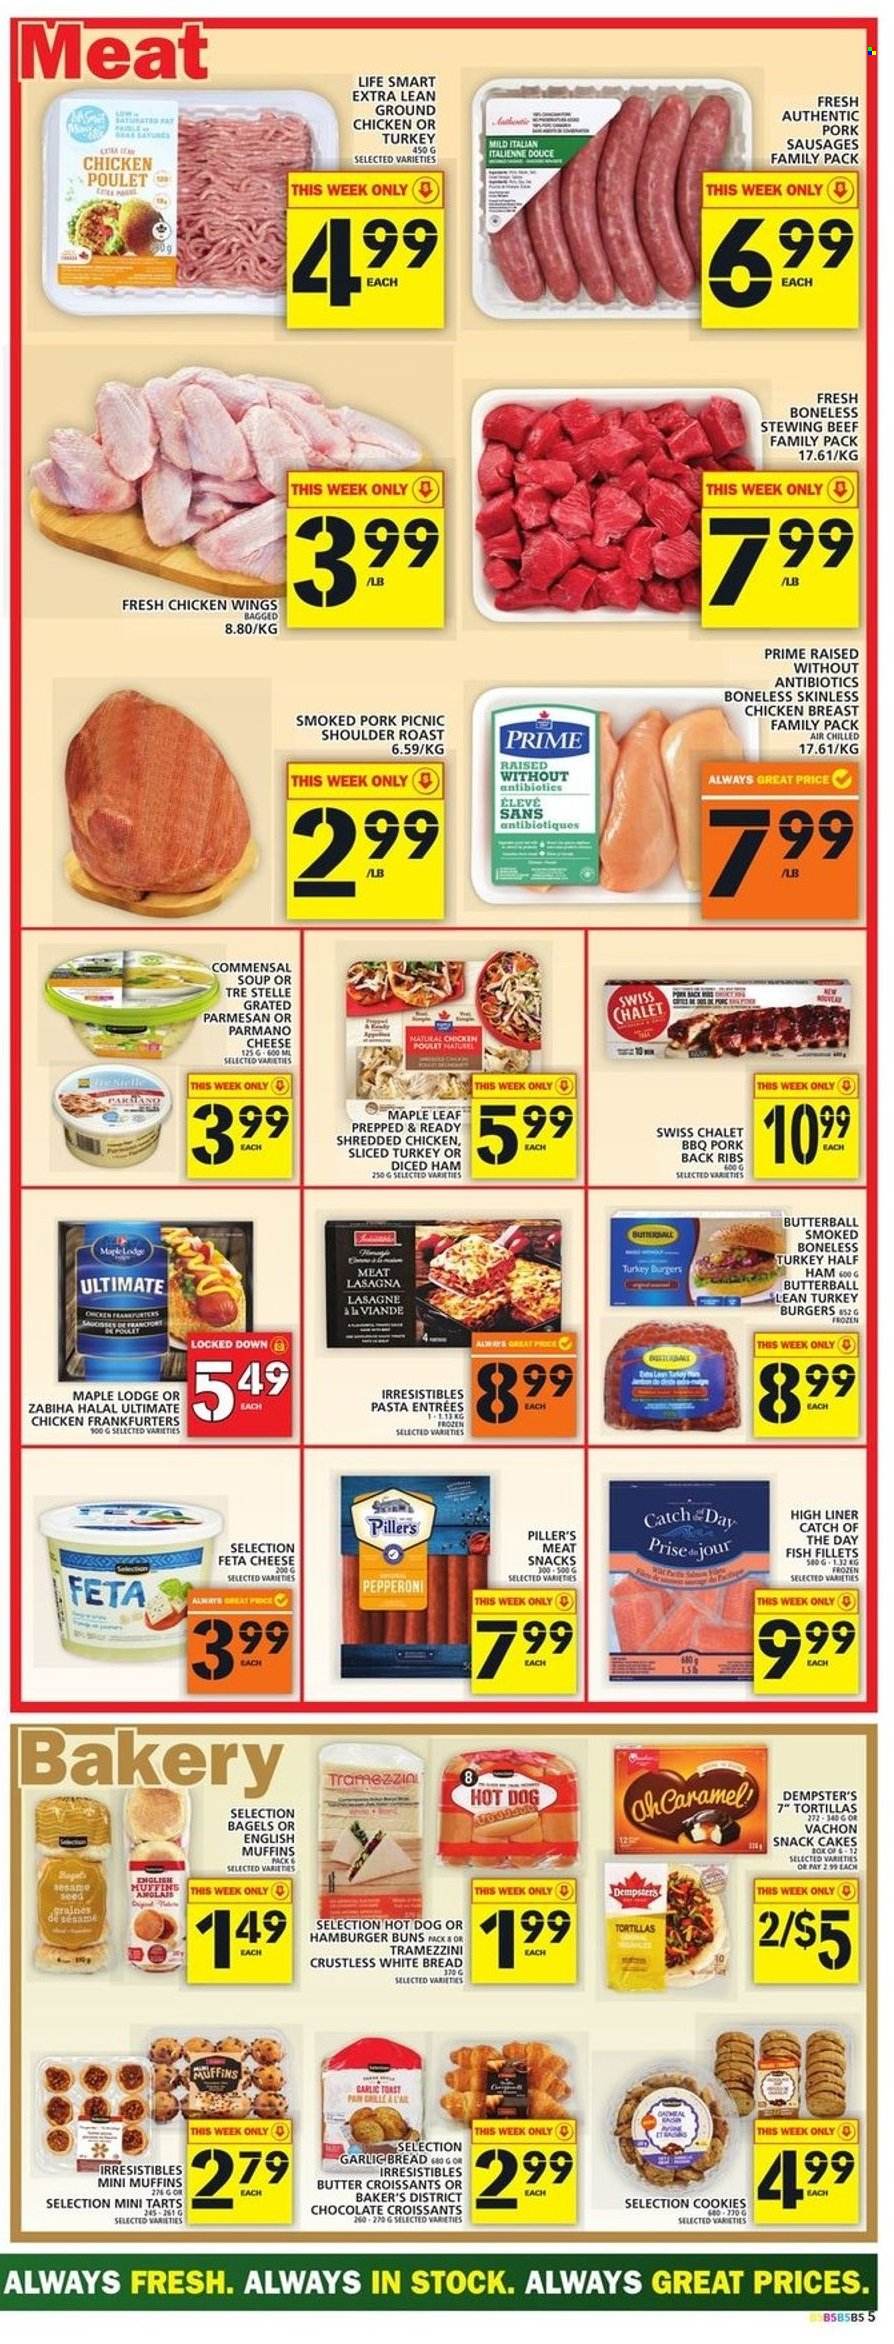 thumbnail - Food Basics Flyer - January 13, 2022 - January 19, 2022 - Sales products - bread, english muffins, tortillas, white bread, cake, croissant, buns, burger buns, fish fillets, fish, hot dog, soup, pasta, lasagna meal, Butterball, sliced turkey, half ham, ham, sausage, pepperoni, parmesan, cheese, feta, chicken wings, cookies, chocolate, snack, ground chicken, chicken breasts, chicken, beef meat, stewing beef, turkey burger, pan. Page 5.